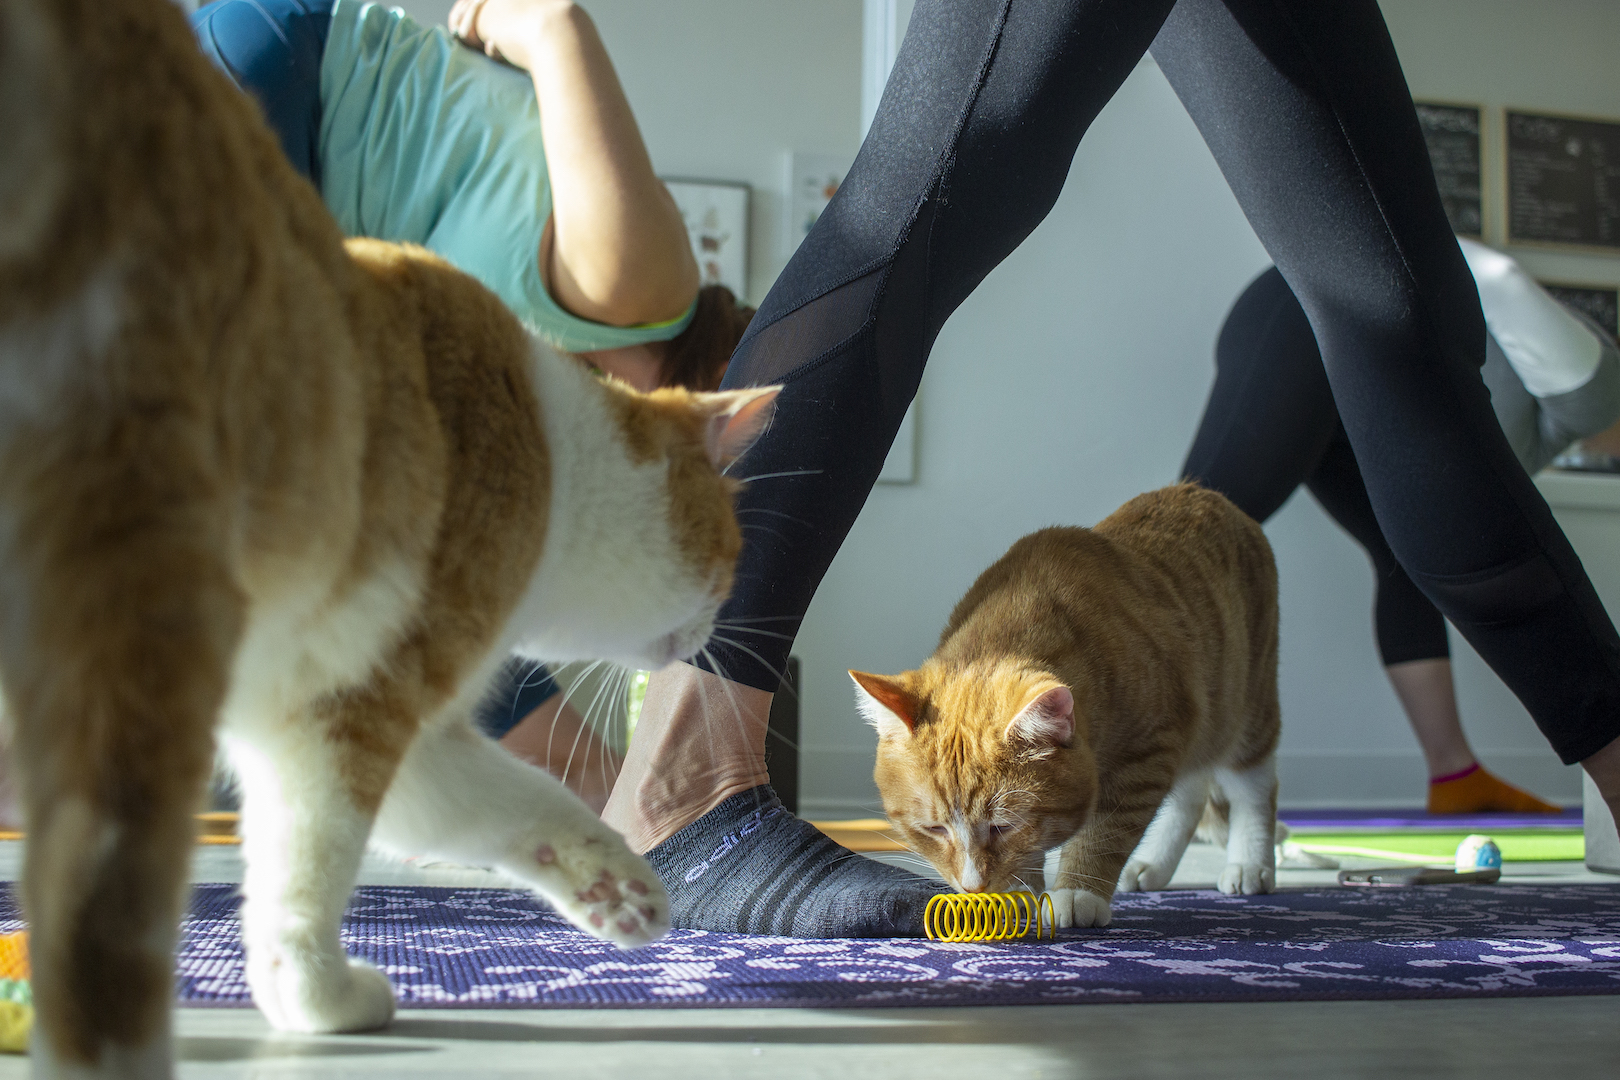 Cats wander between people's legs as they do yoga at a cat cafe